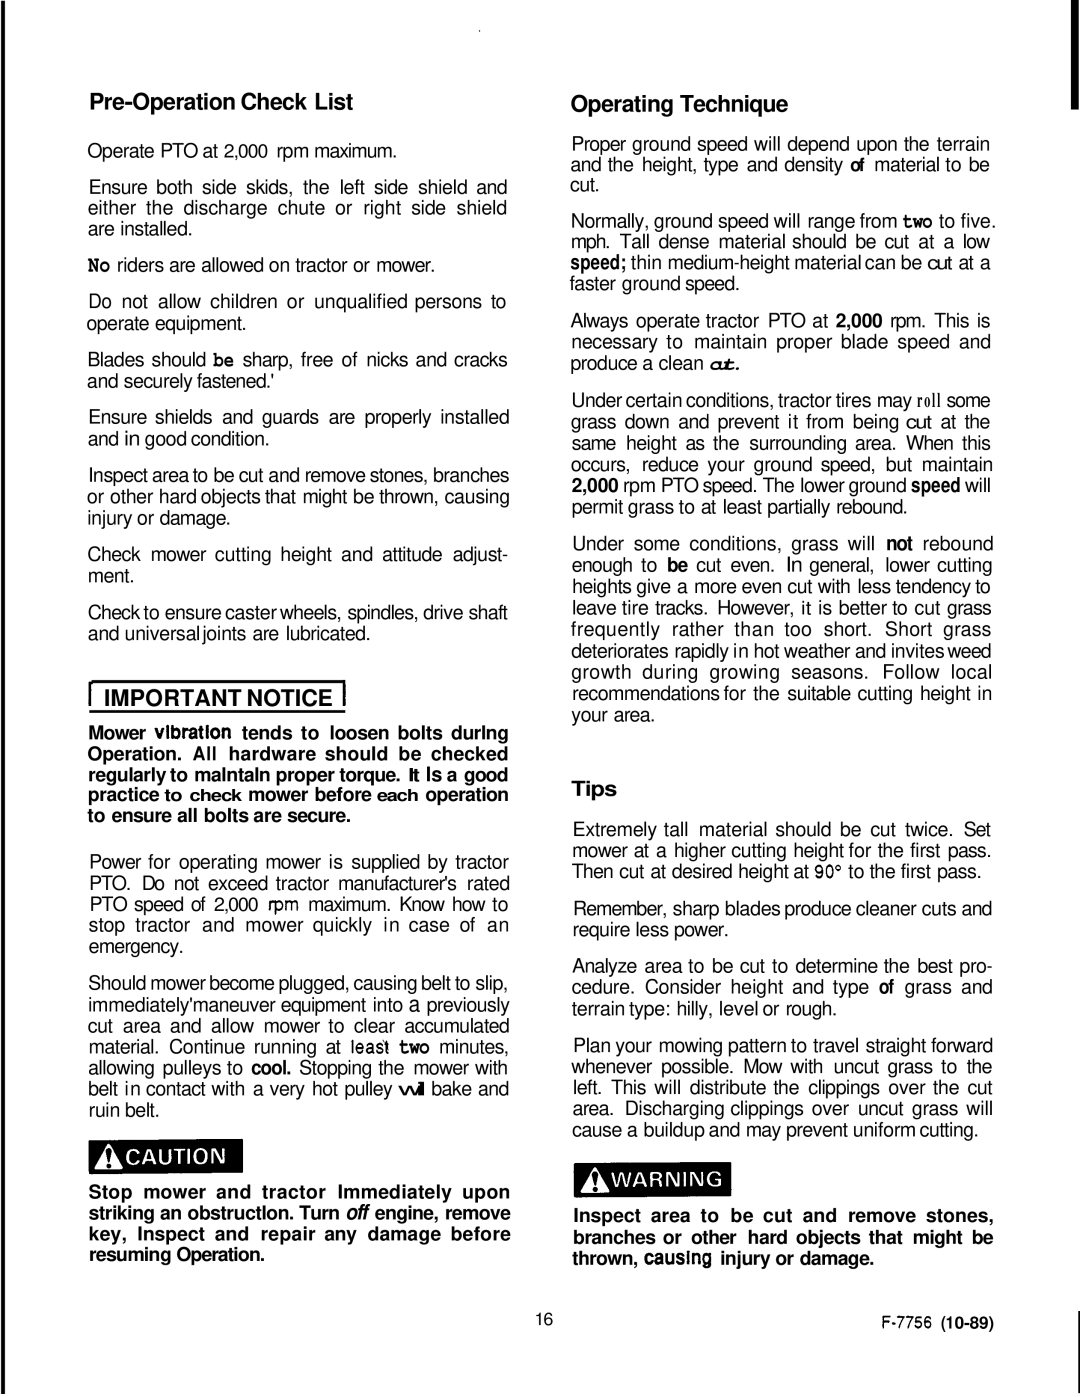 Honda Power Equipment RM752A manual Pre-Operation Check List, f IMPORTANT NOTICE, Operating Technique, Tips 